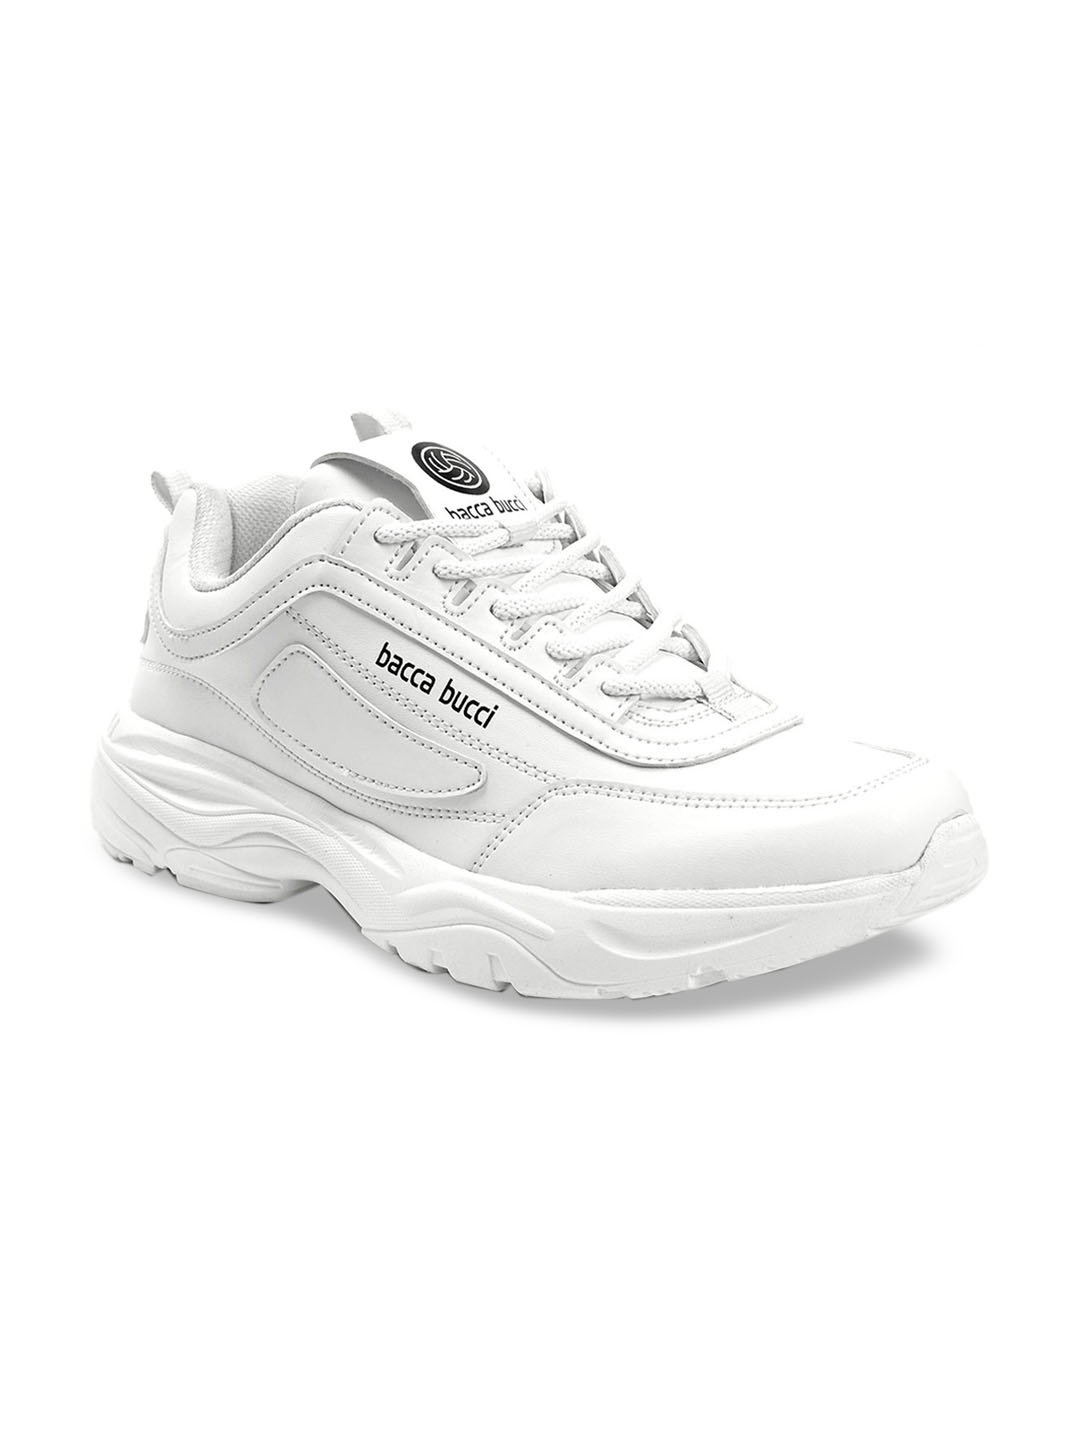 Buy Bacca Bucci Men White Sneakers - Casual Shoes for Men 9891733 | Myntra